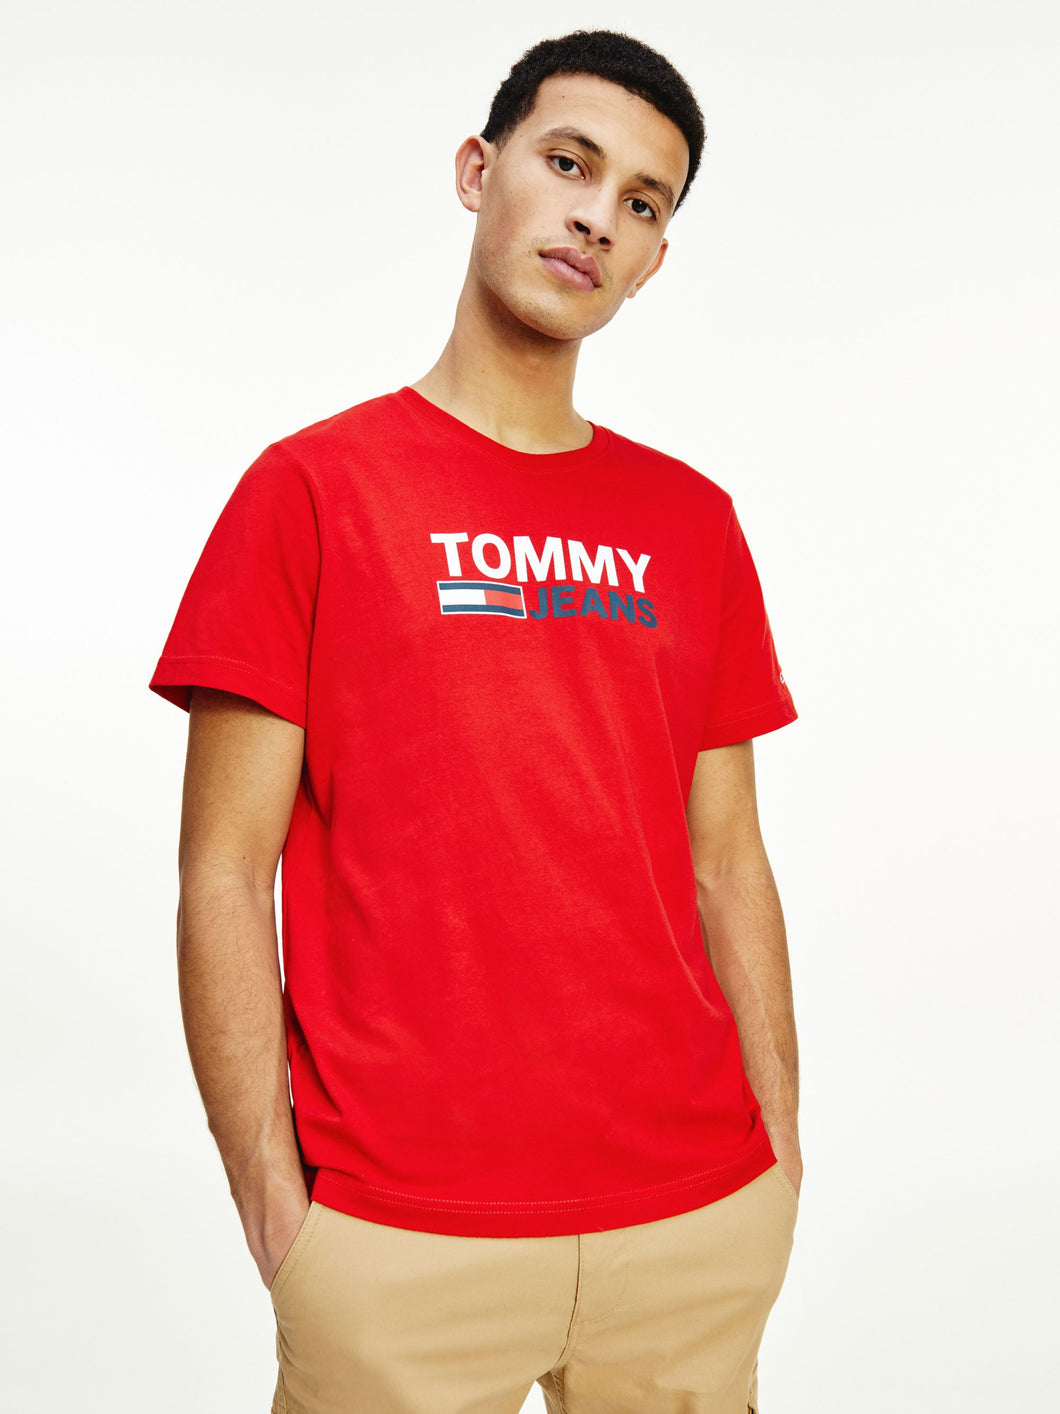 T-shirt Tommy corp red